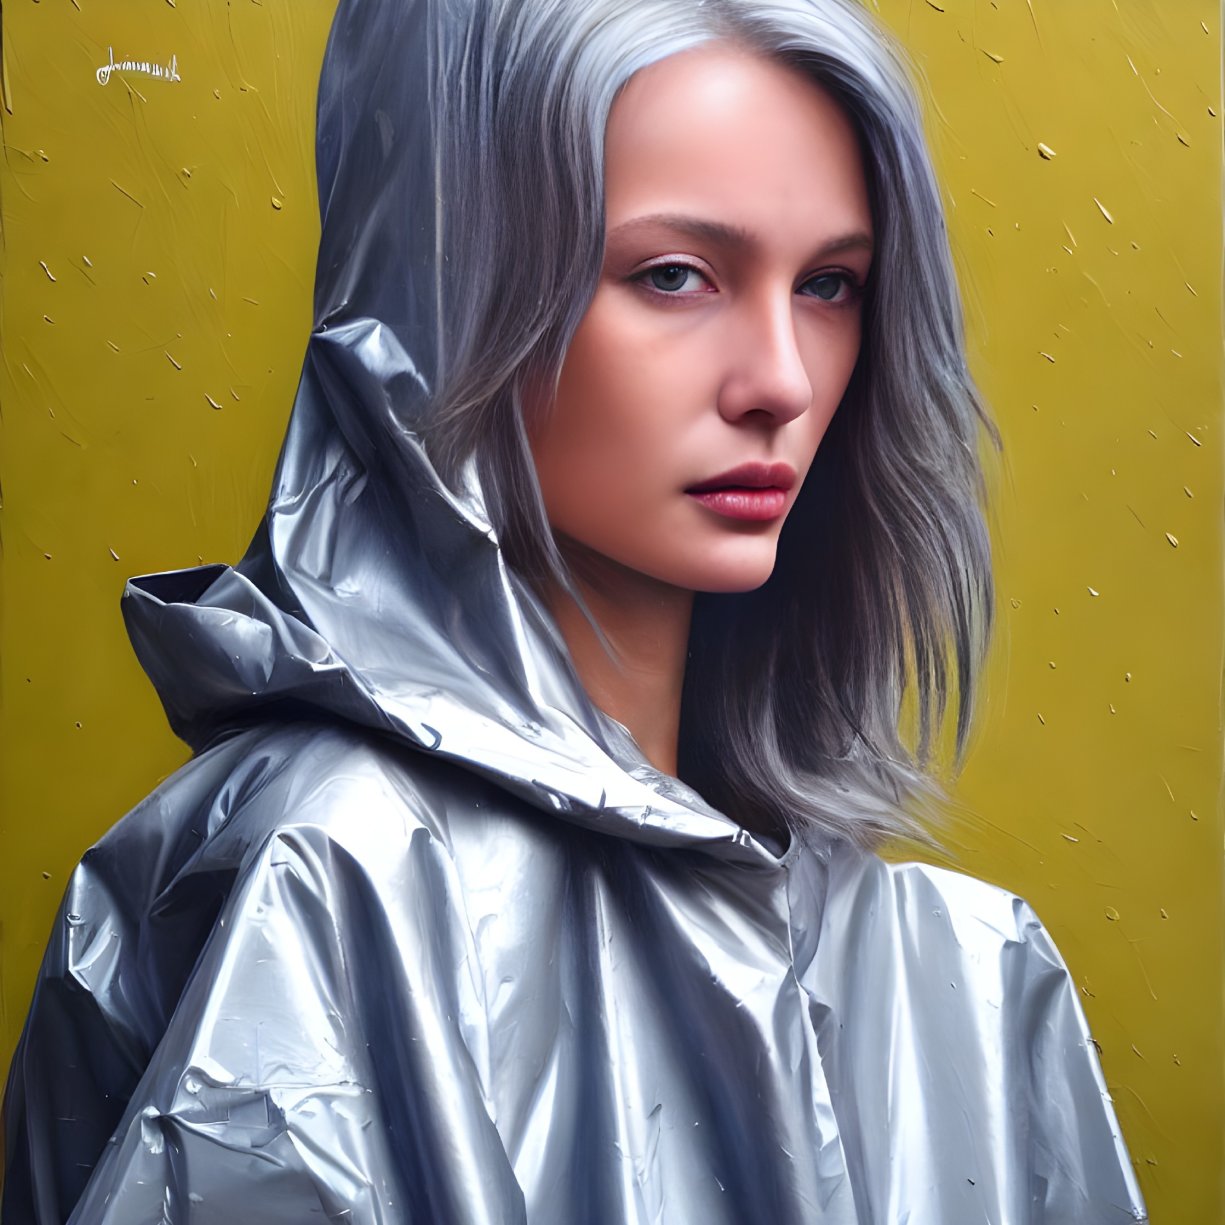 Silver-Haired Woman in Matching Raincoat on Yellow Background with Raindrops